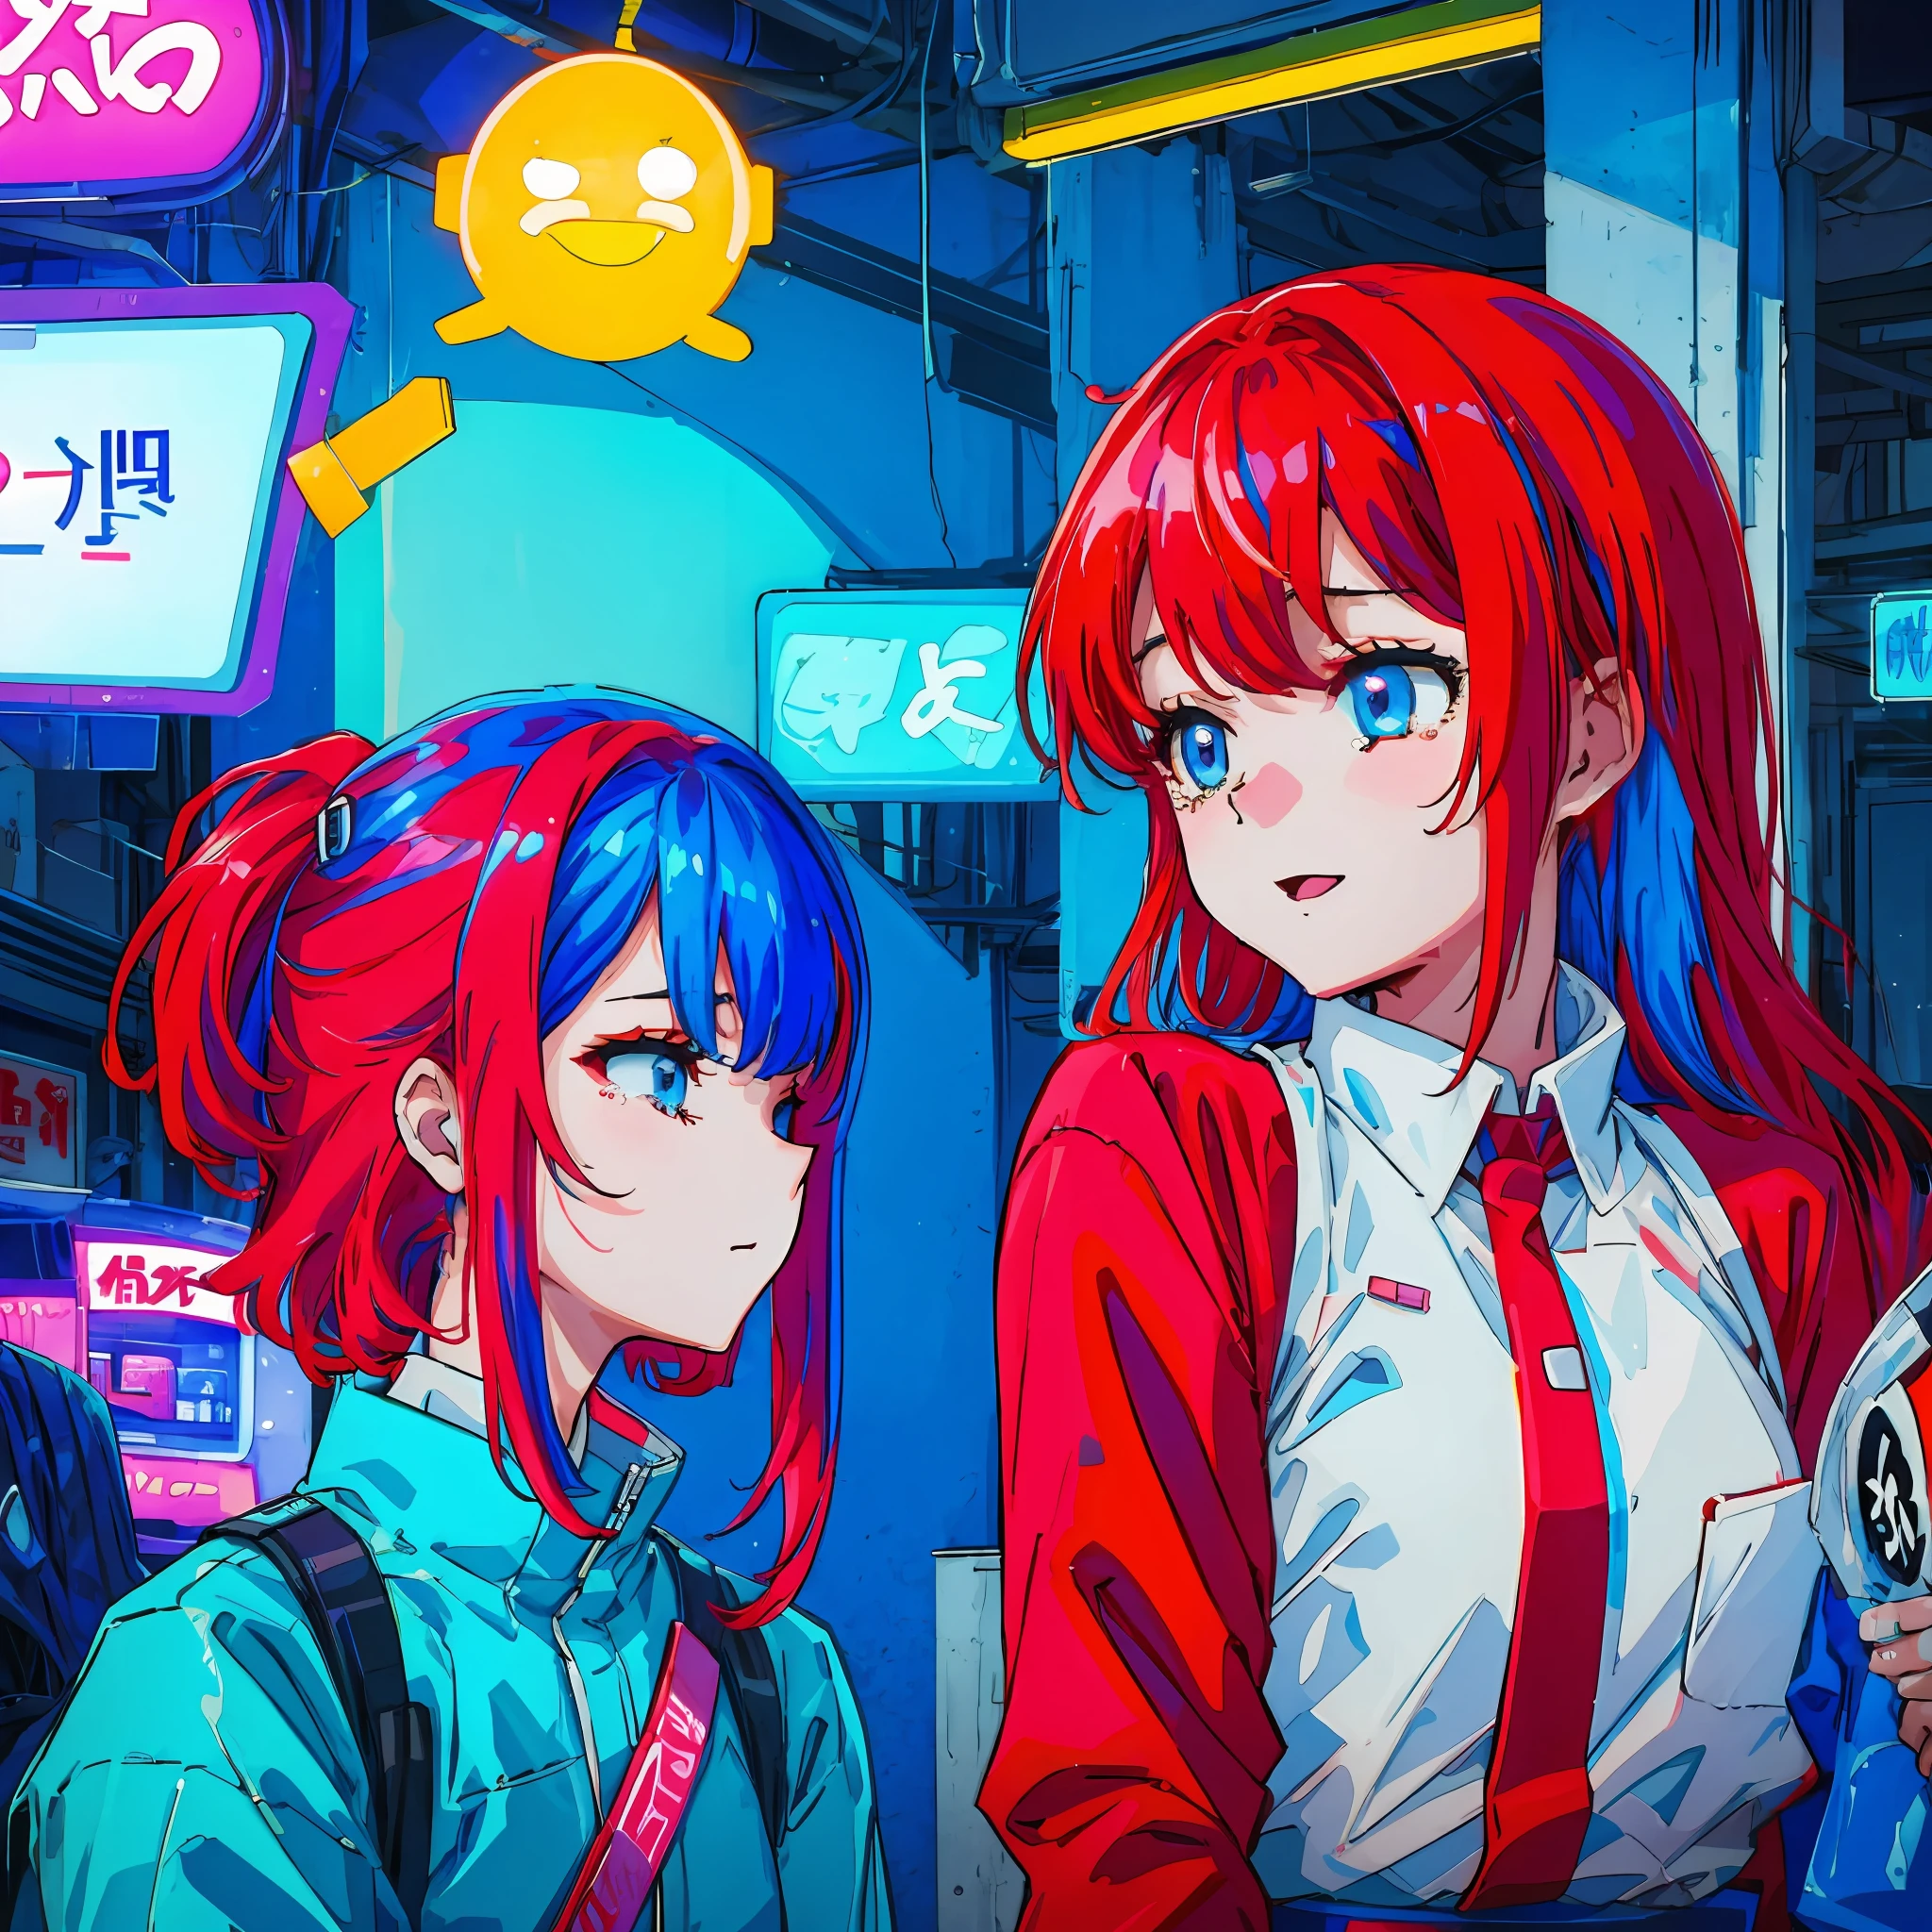 Draw a scene of two Korean twin sisters one redhead and the other with neon blue hair, and that the one with blue hair is crying and the redhead is happy.